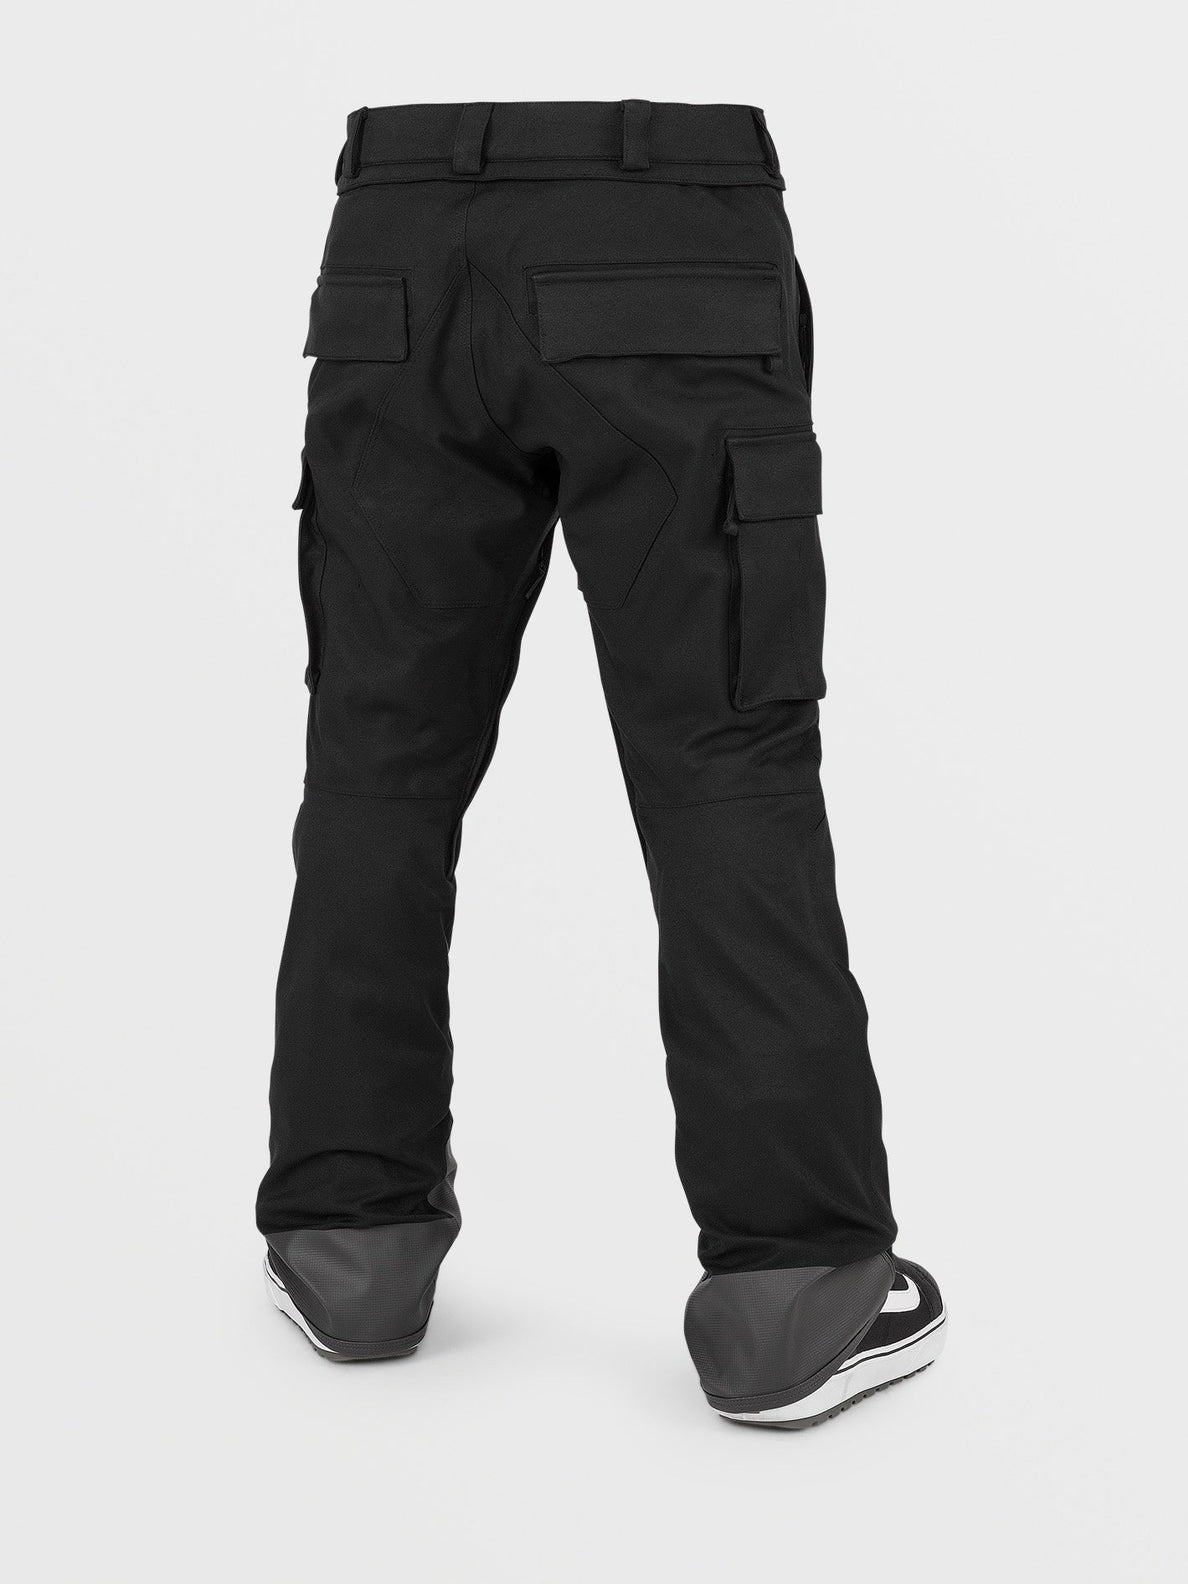 New Articulated Trousers - BLACK (G1352407_BLK) [B]